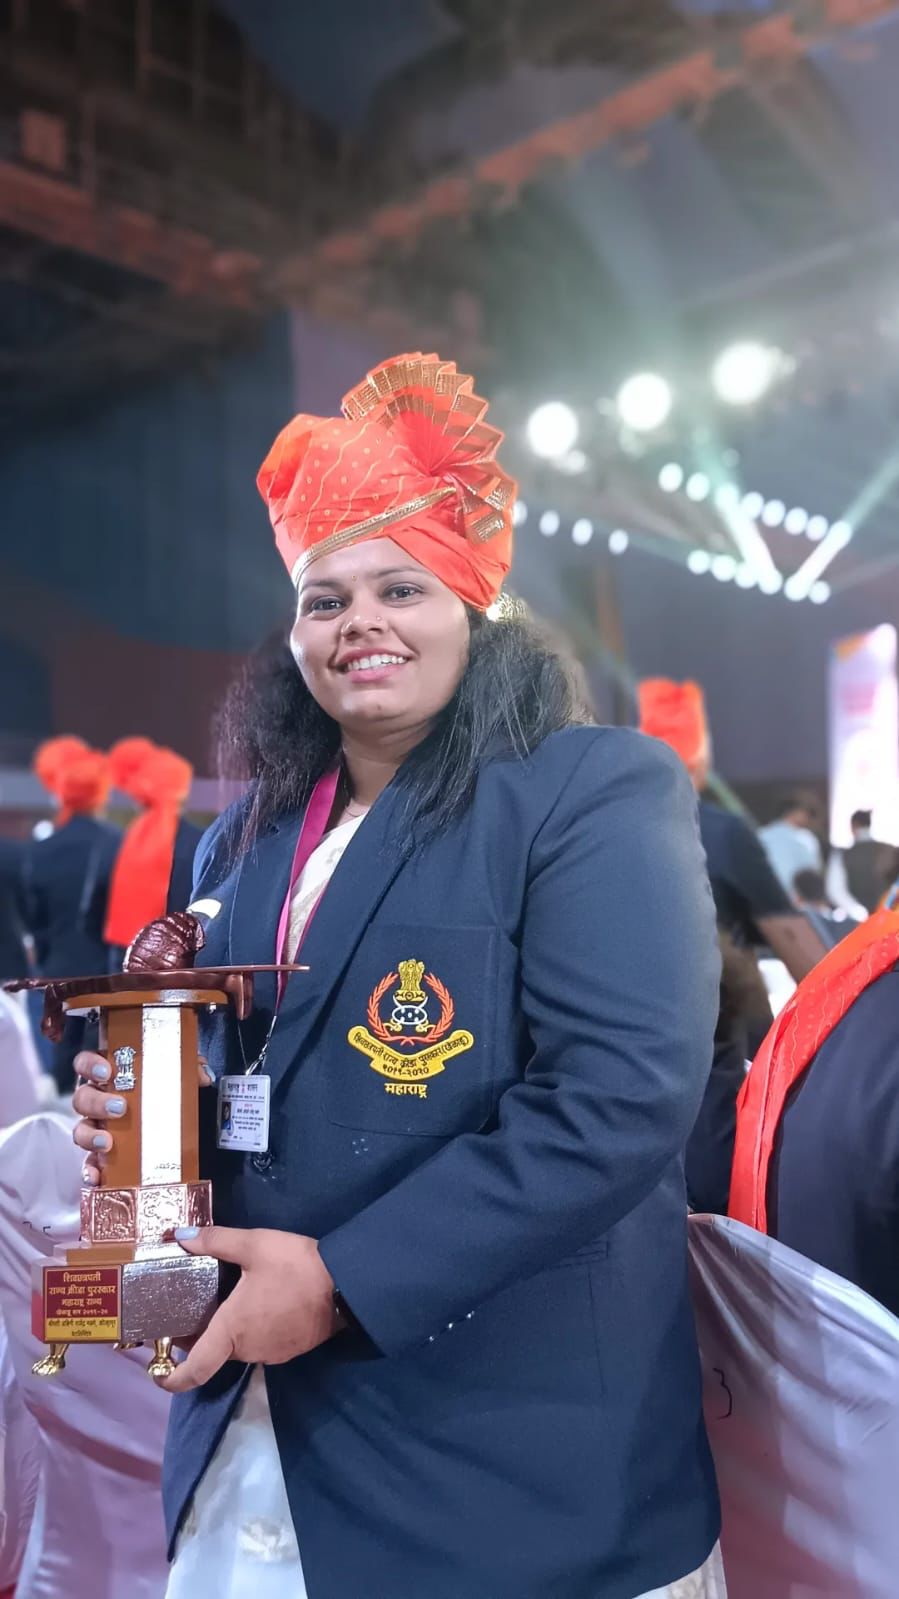 Ashwini Malge was awarded the Shiva Chhatrapati State Sports Award by the State Government